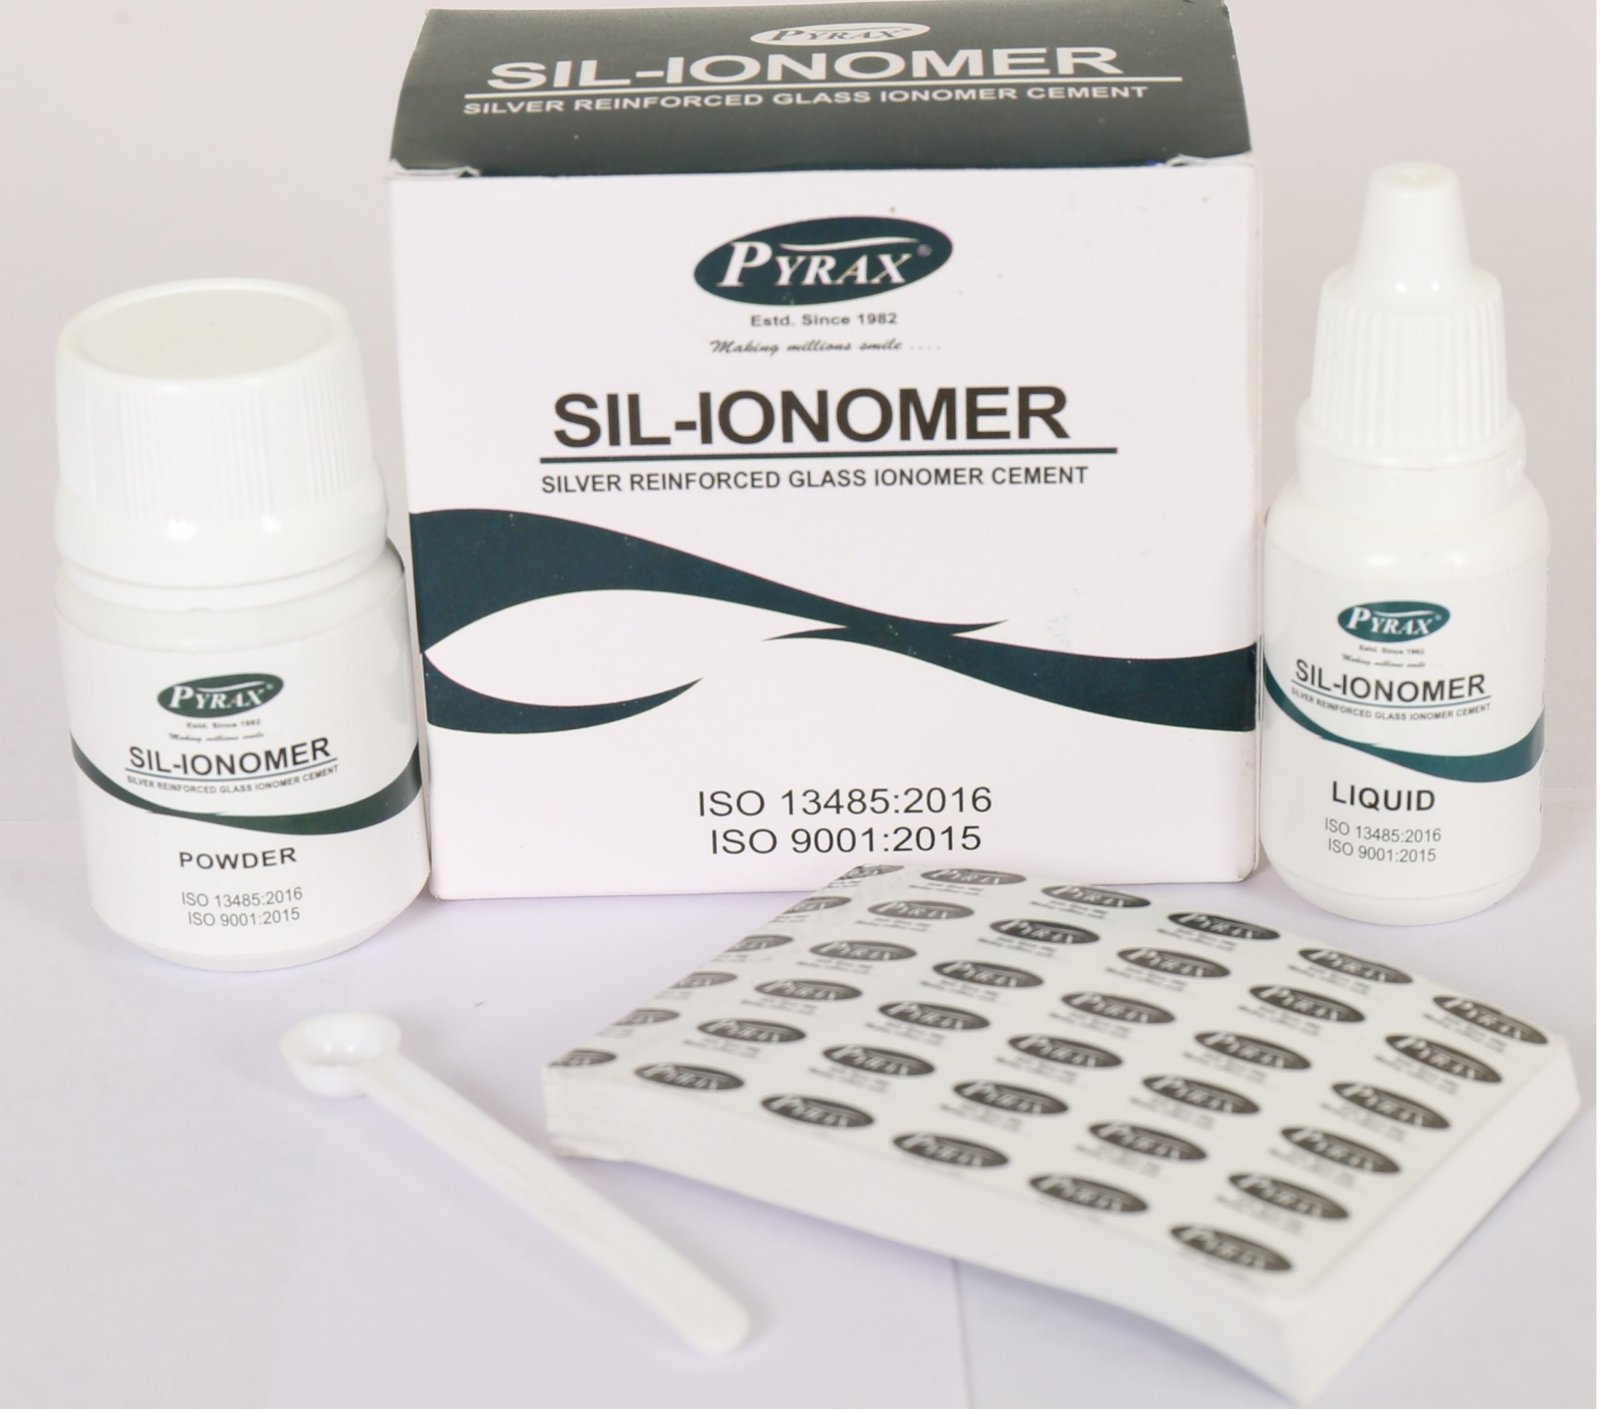 Pyrax SIL-IONOMER (Silver Reinforced Glass Ionomer Cement) – Pyrax